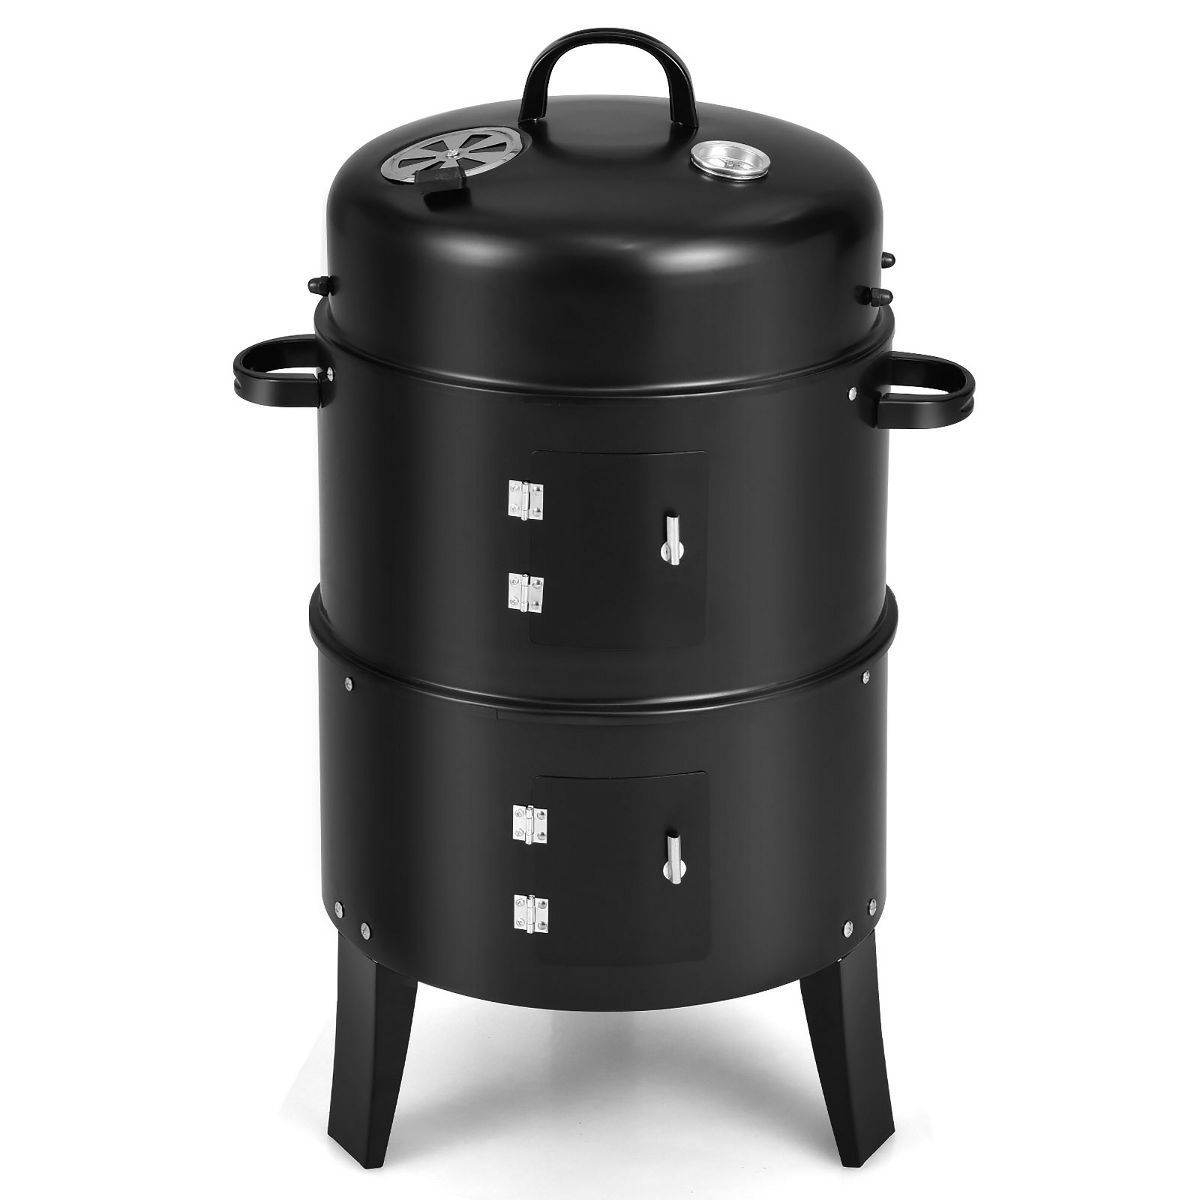 Costway3-in-1 Vertical Charcoal Smoker  Portable BBQ Smoker Grill with Detachable 2 Layer | Target